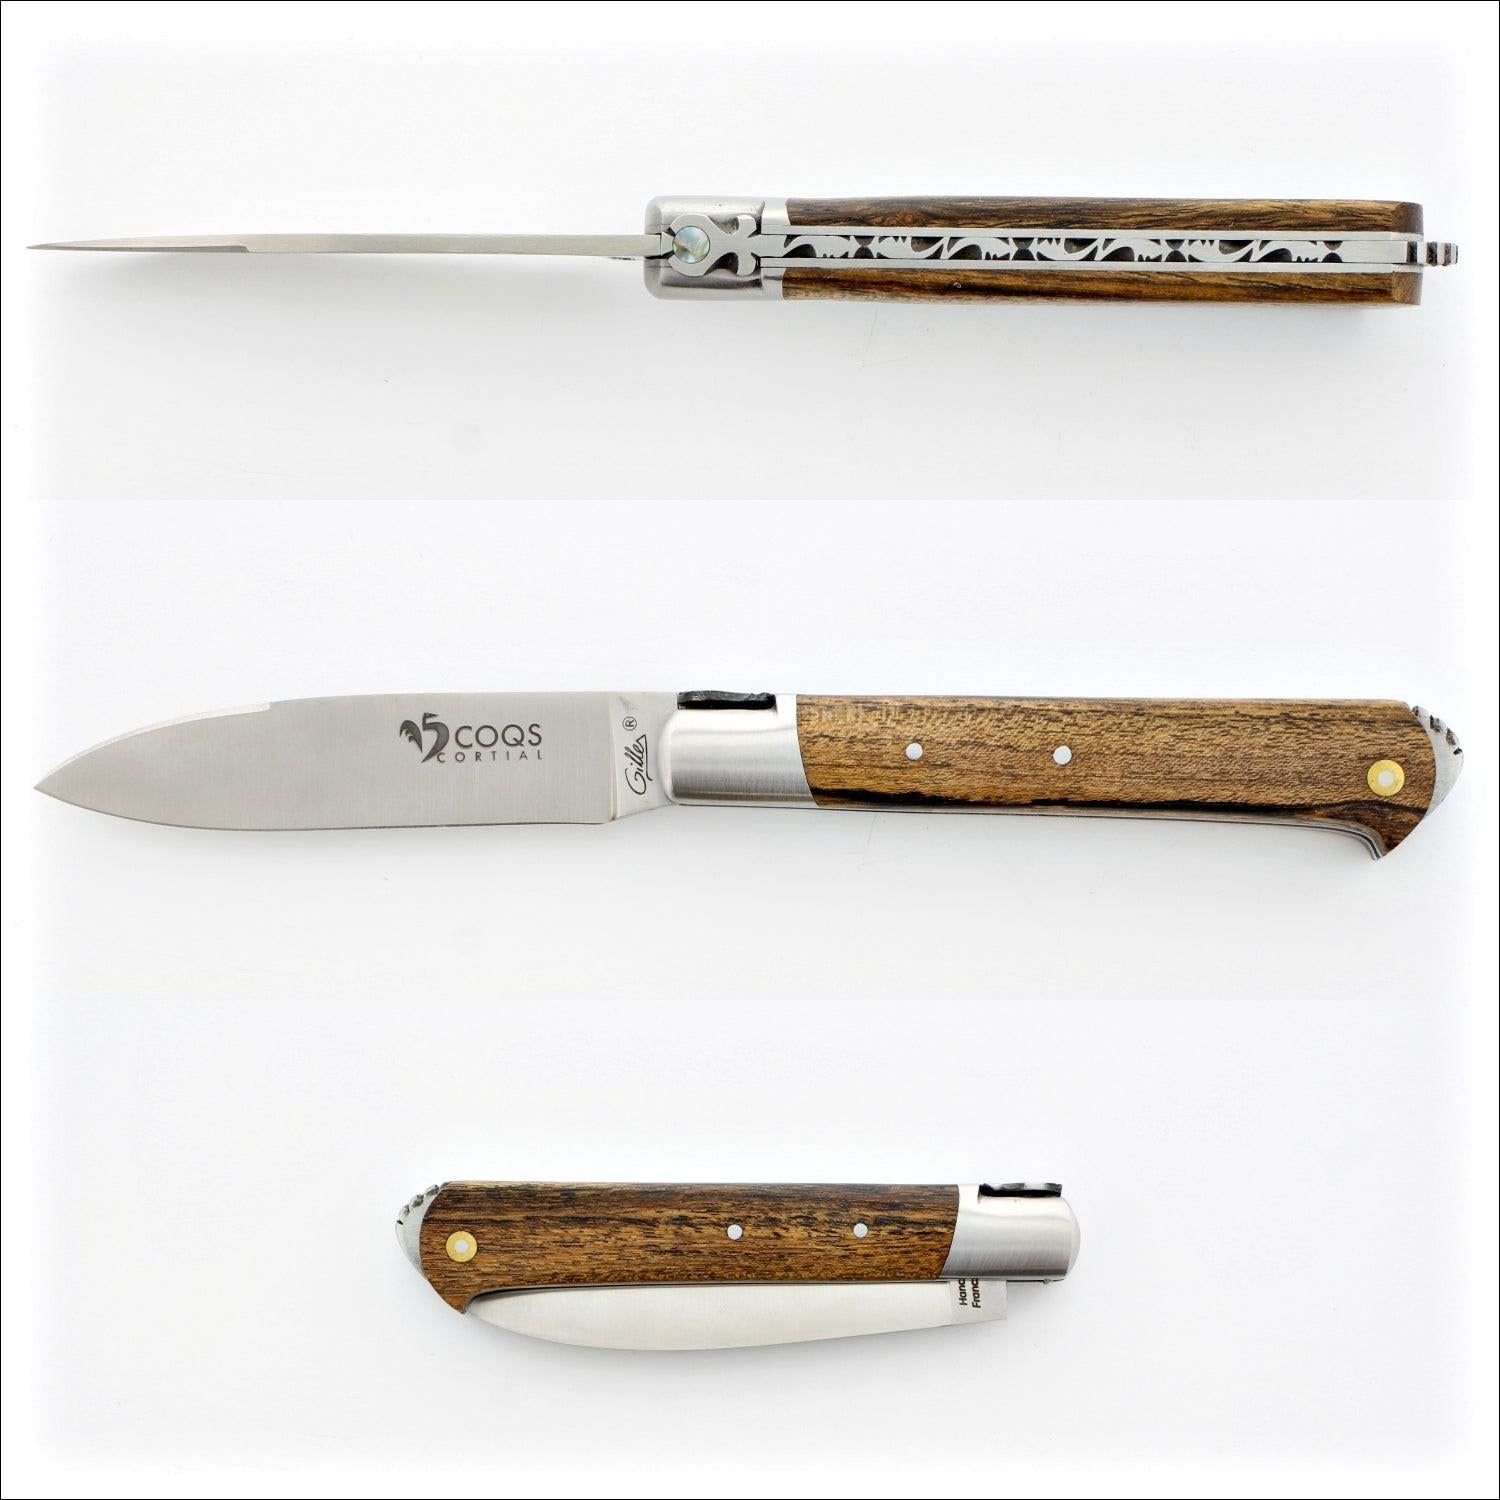 5 Coqs Pocket Knife - Bocote & Mother of Pearl Inlay